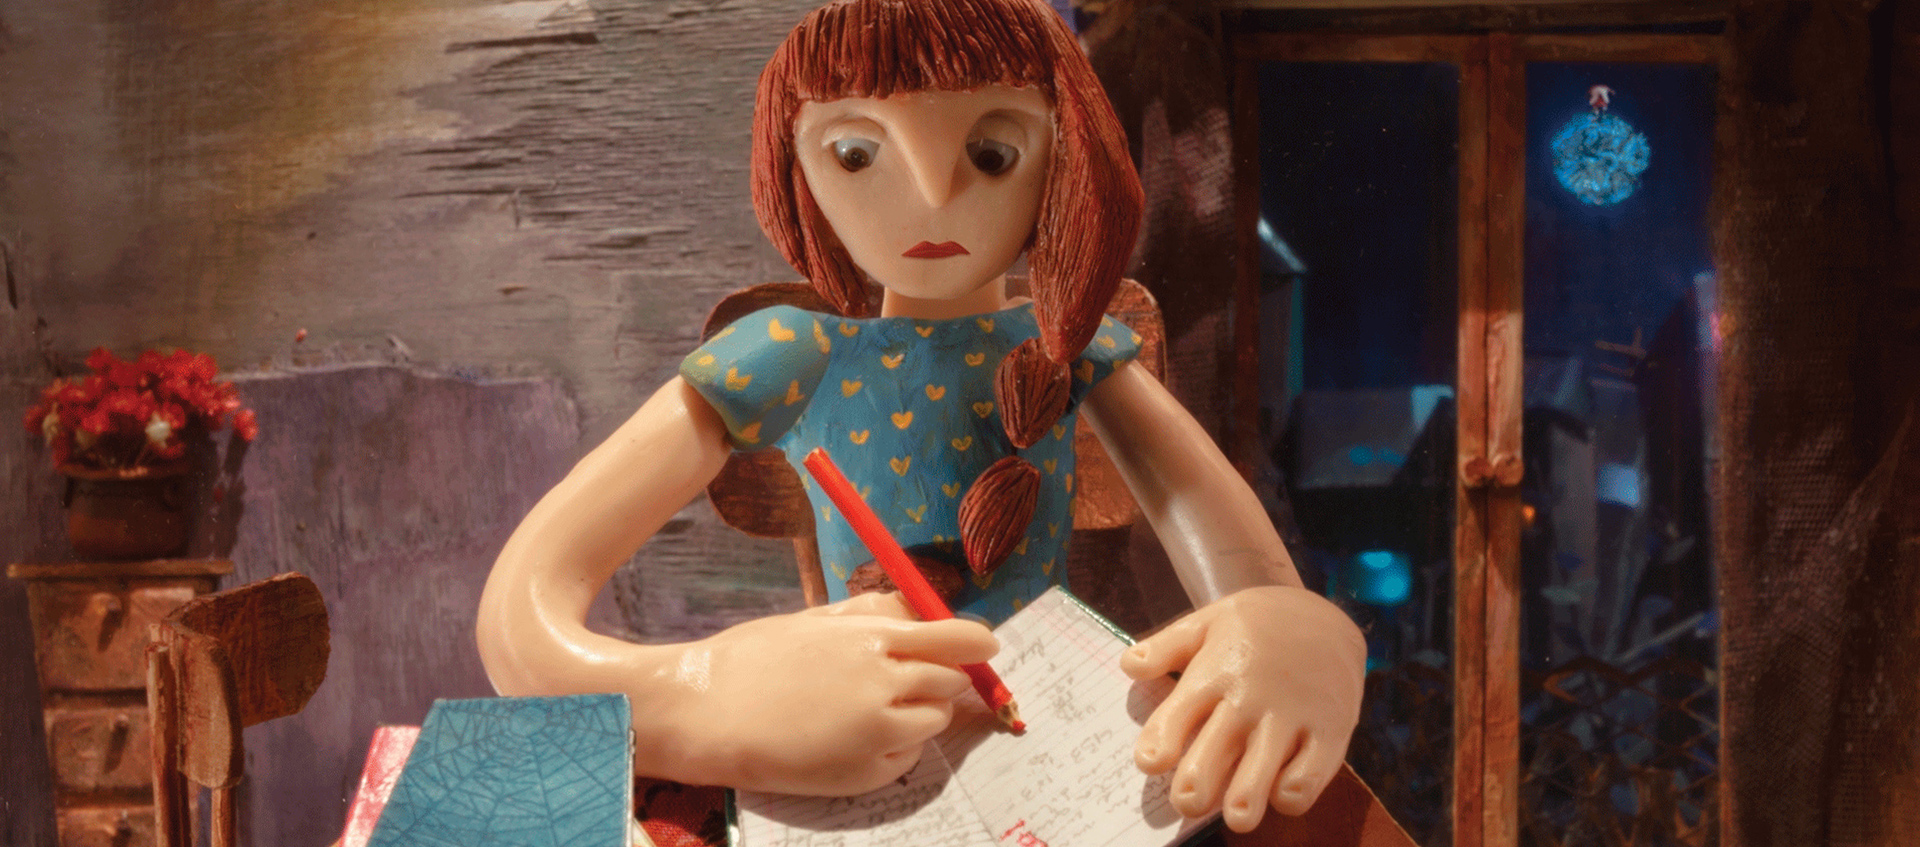 A woman, constructed from clay, sits at a desk and writes in a journal.